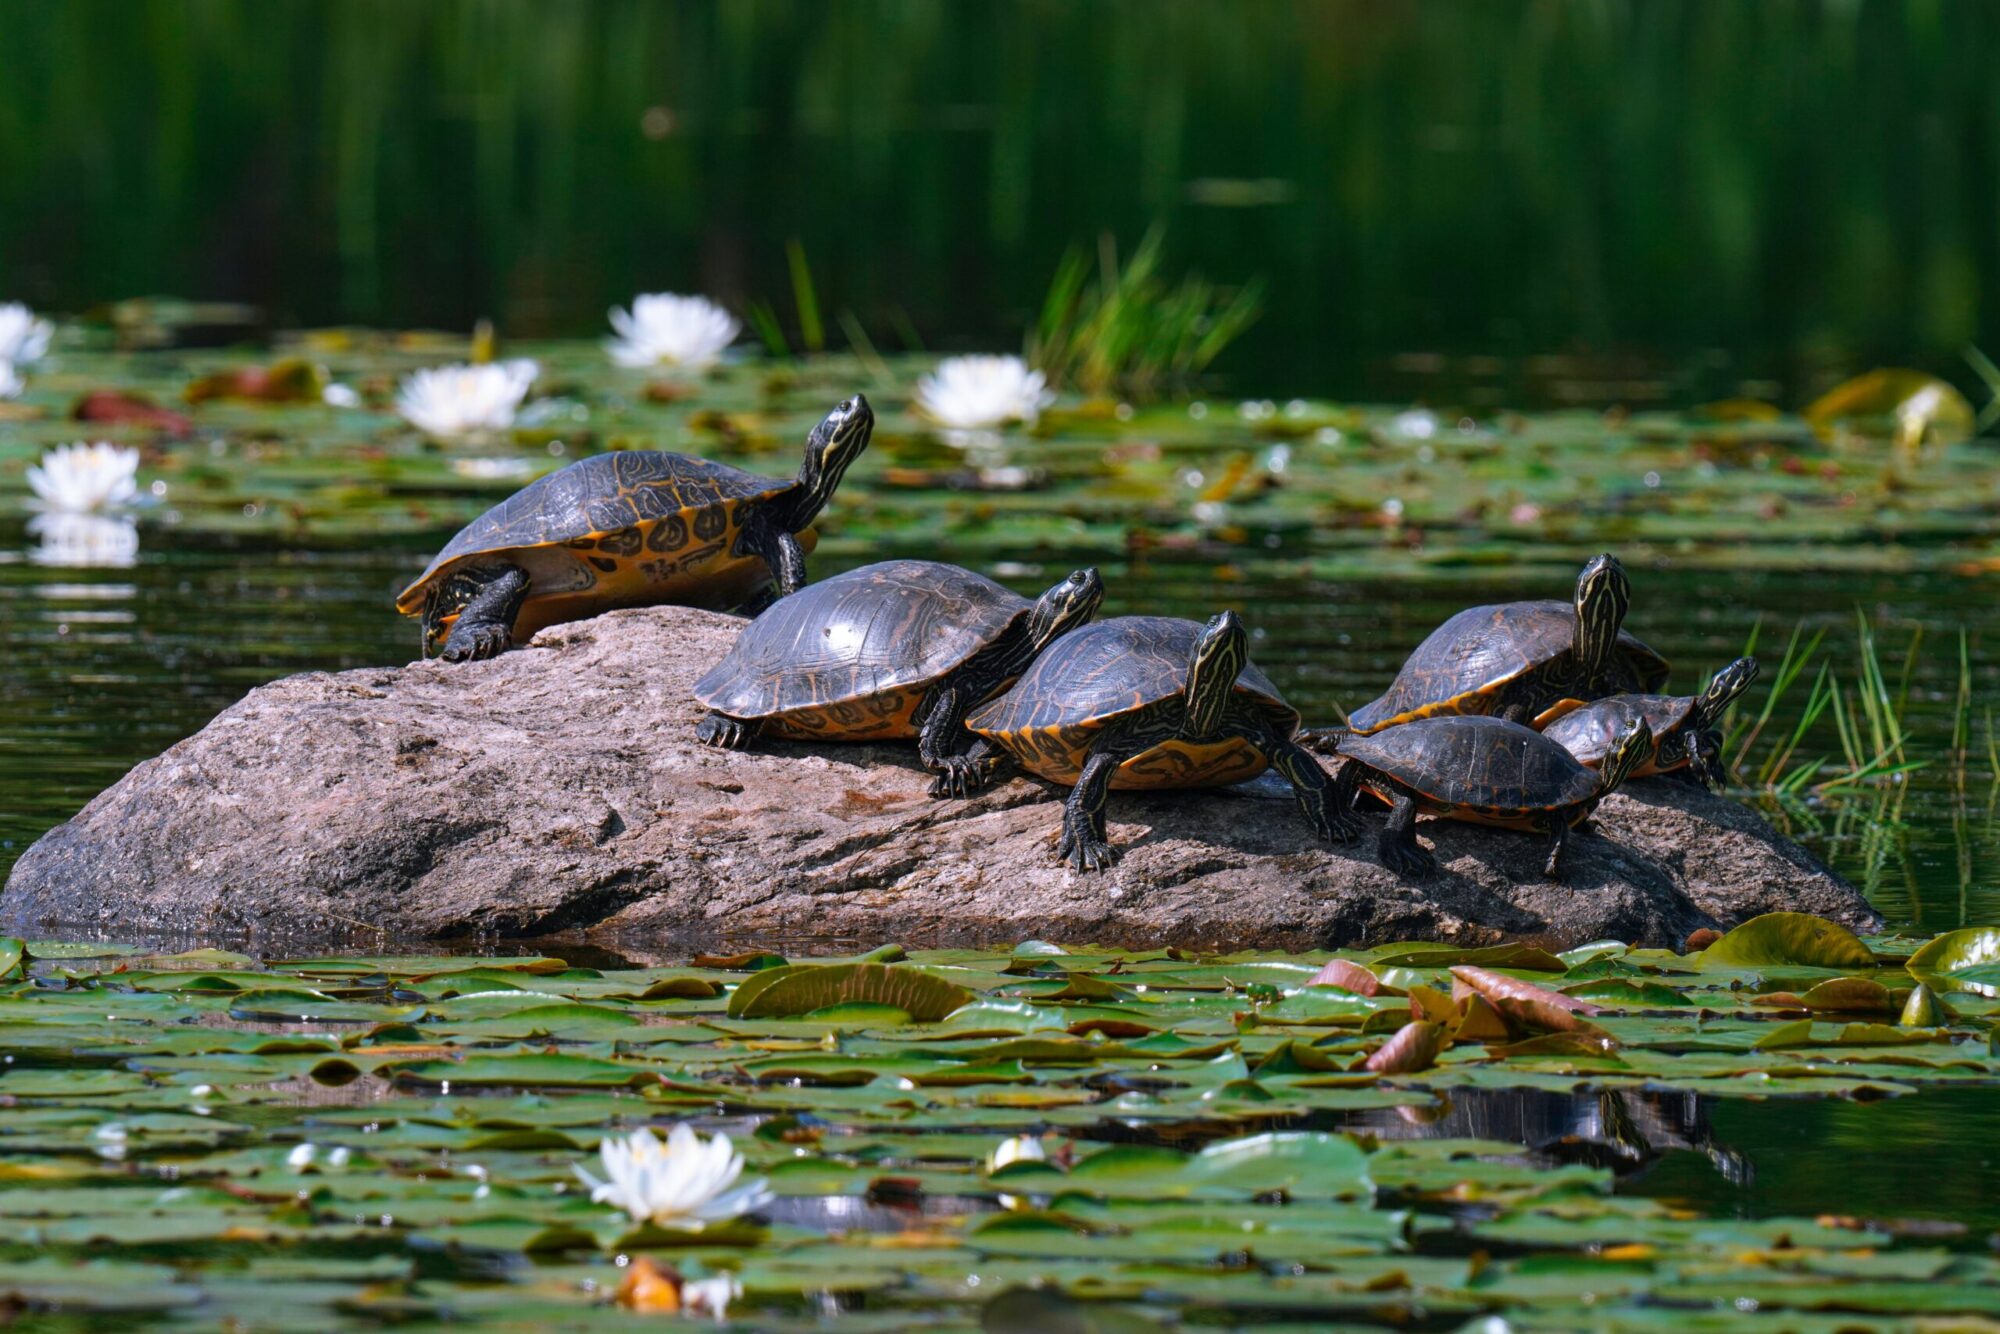 five turtles on a rock amidst lily pads